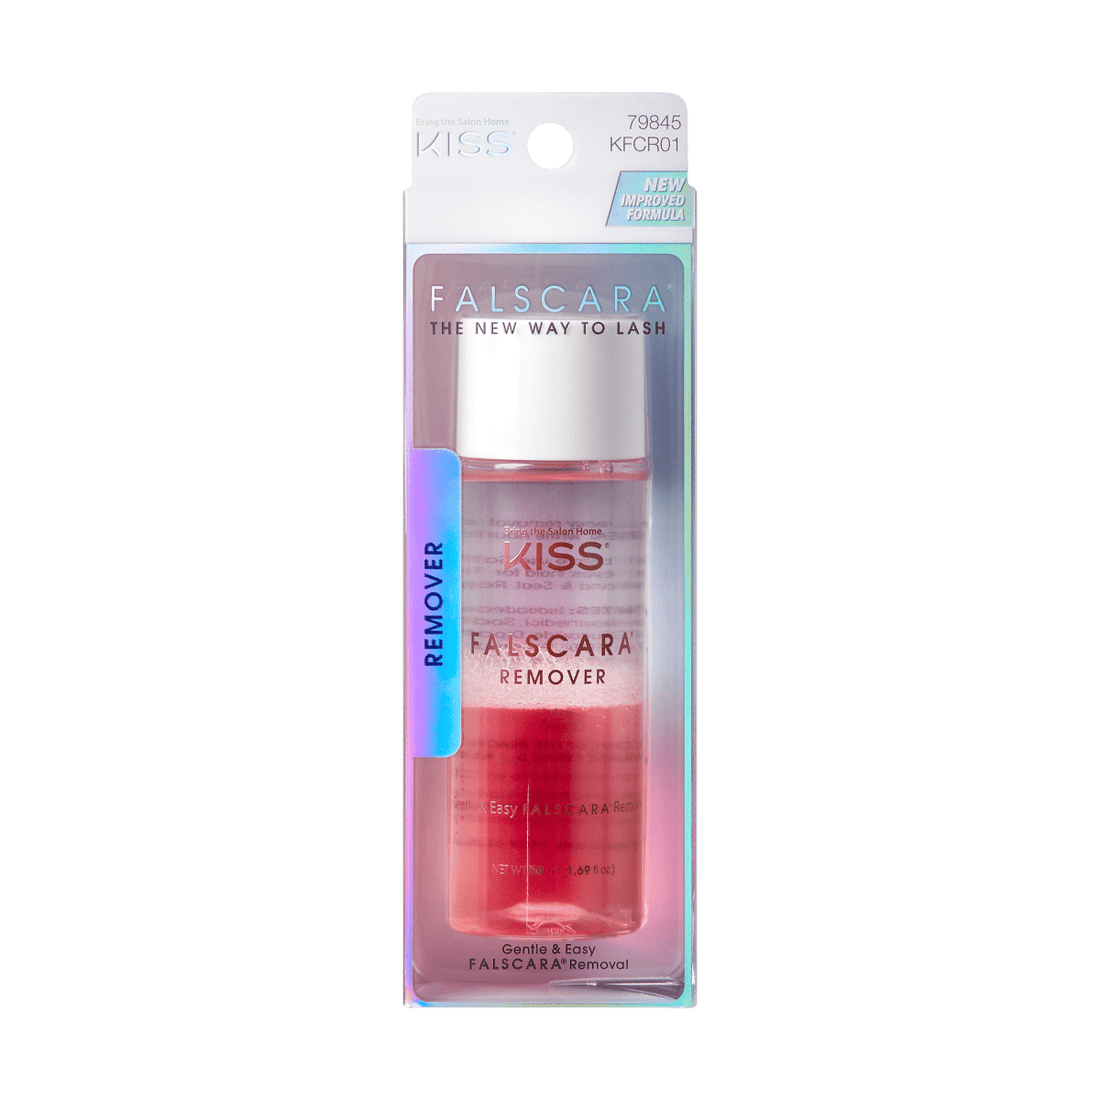 Falscara Rosewater Infused, Eye Makeup Remover and Lash Cleanser